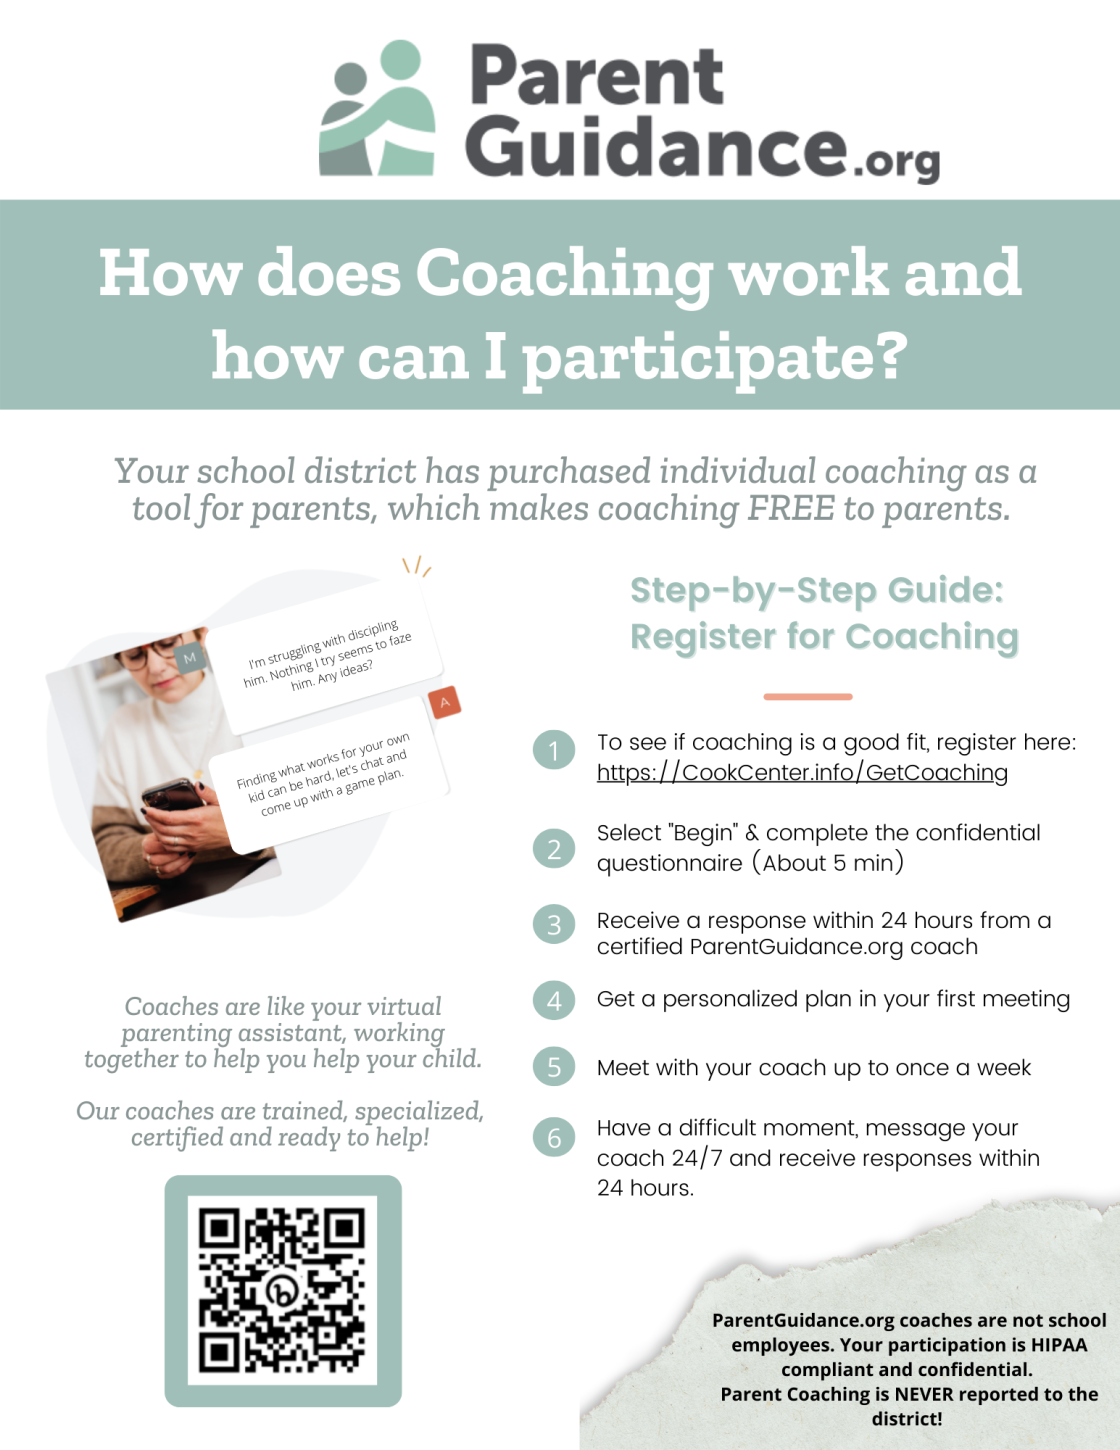 How Does Coaching Work?